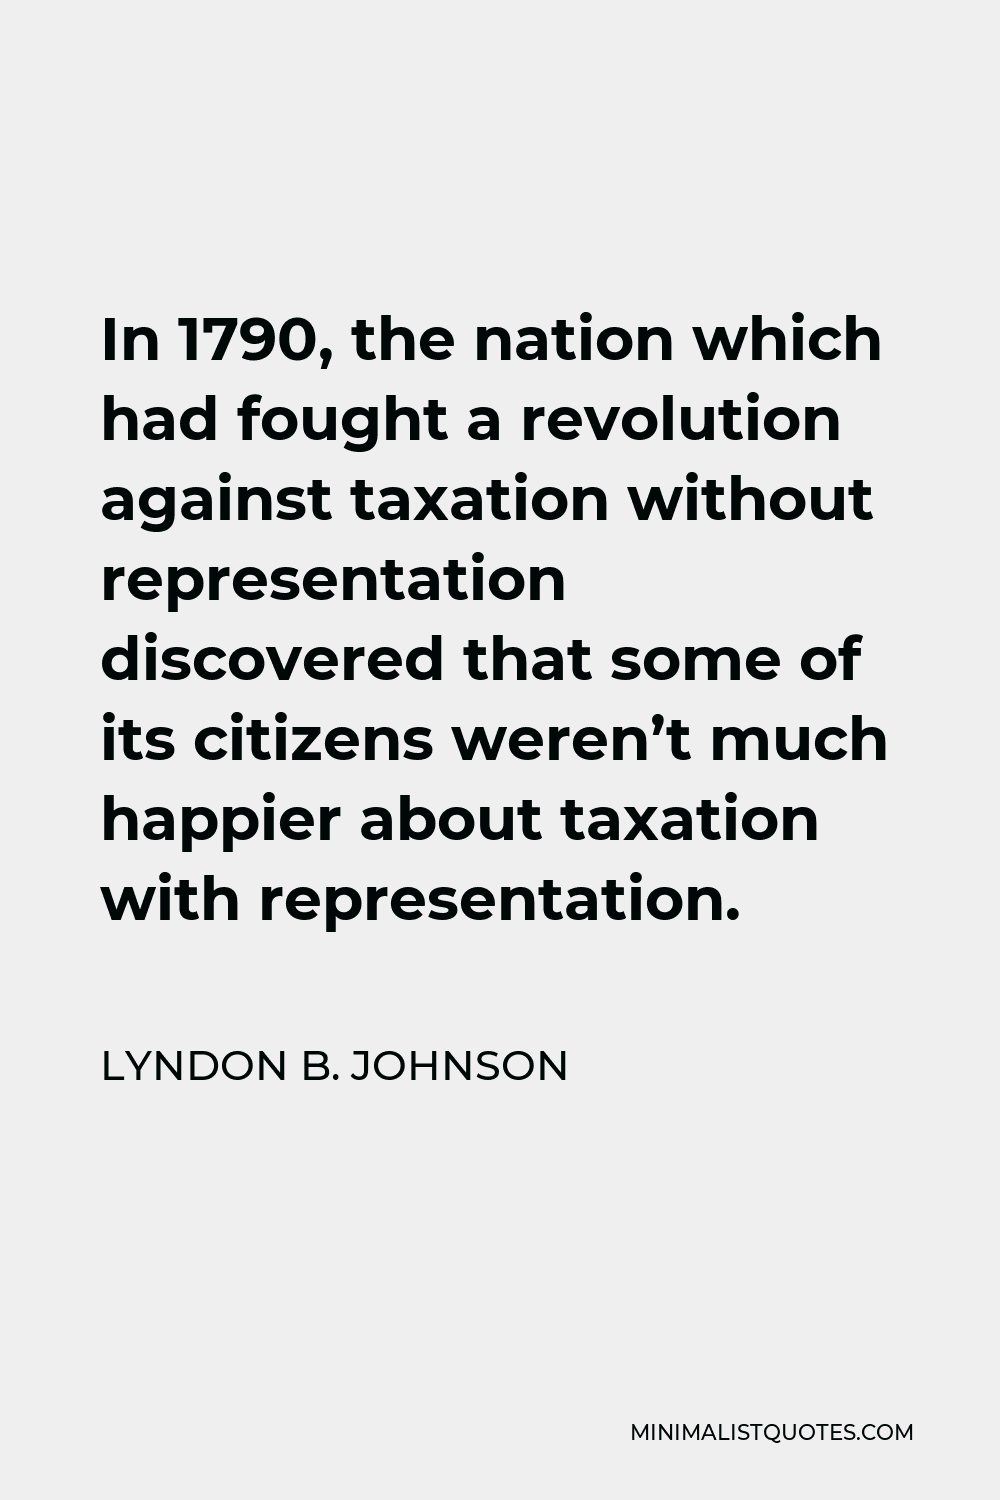 Lyndon B. Johnson Quote - In 1790, the nation which had fought a revolution against taxation without representation discovered that some of its citizens weren’t much happier about taxation with representation.